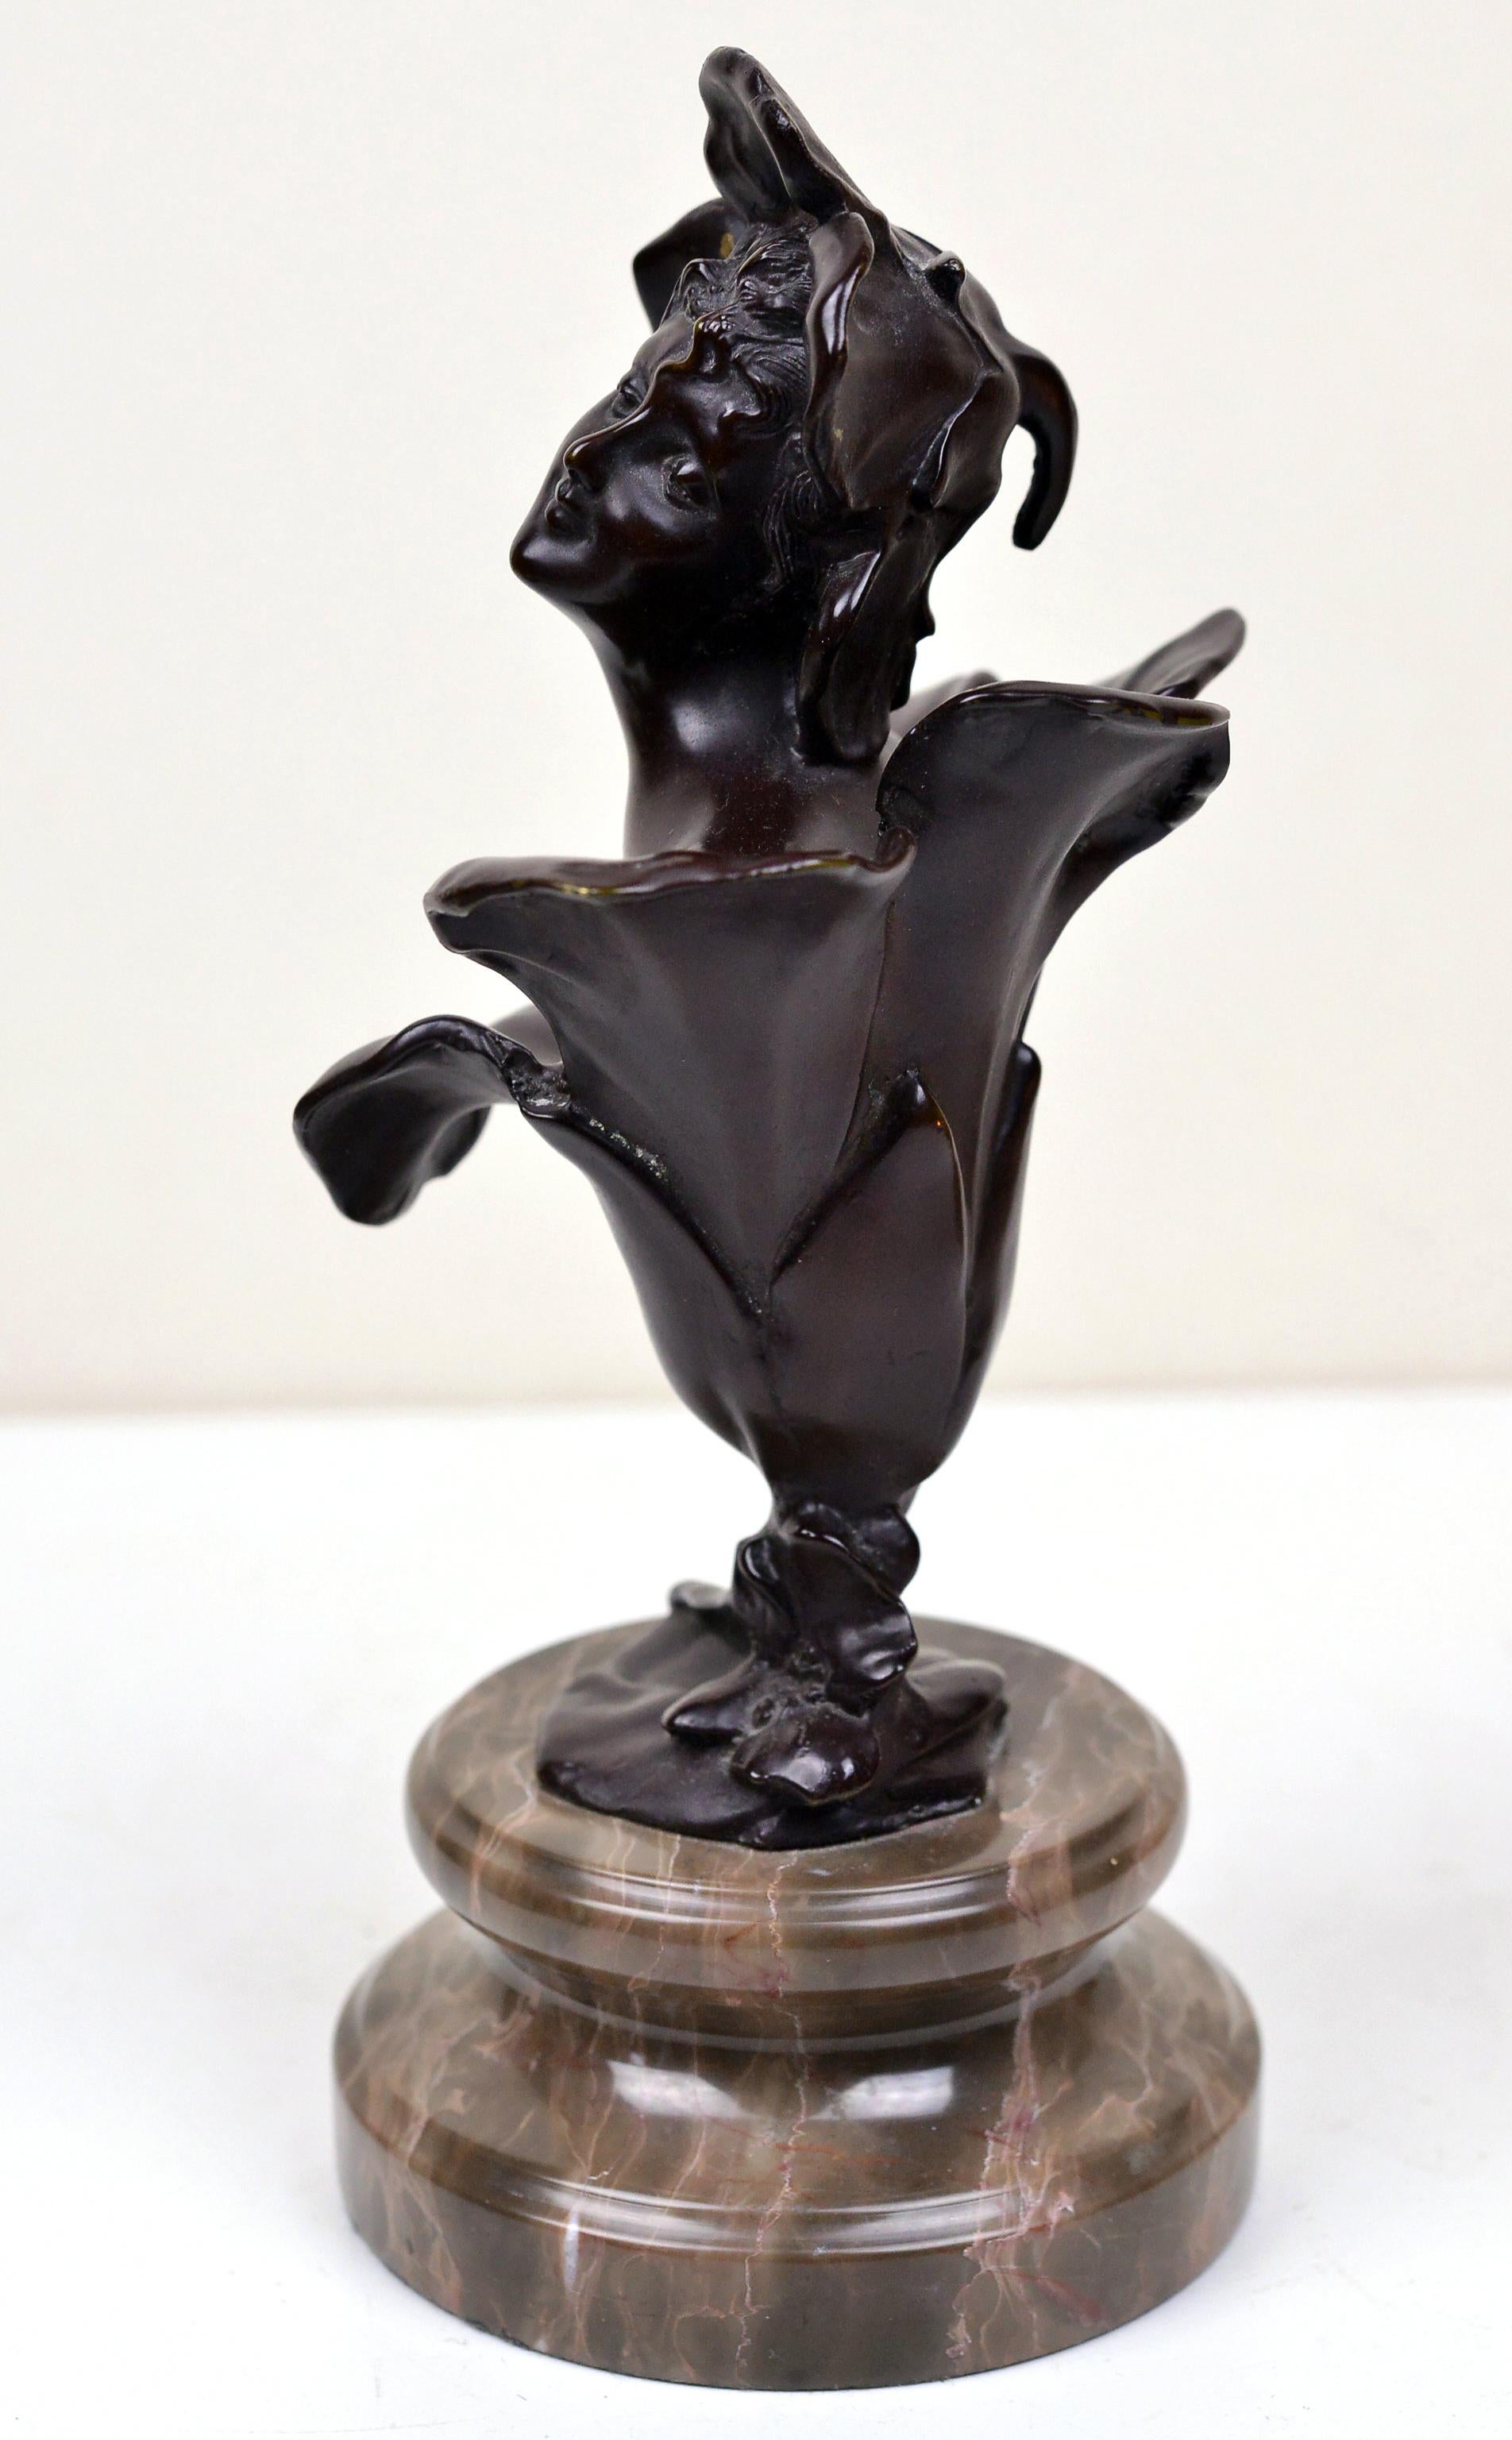 Figurine of Thumbelina Patinated Bronze n Stone Base 19th Century Art Nouveau For Sale 1